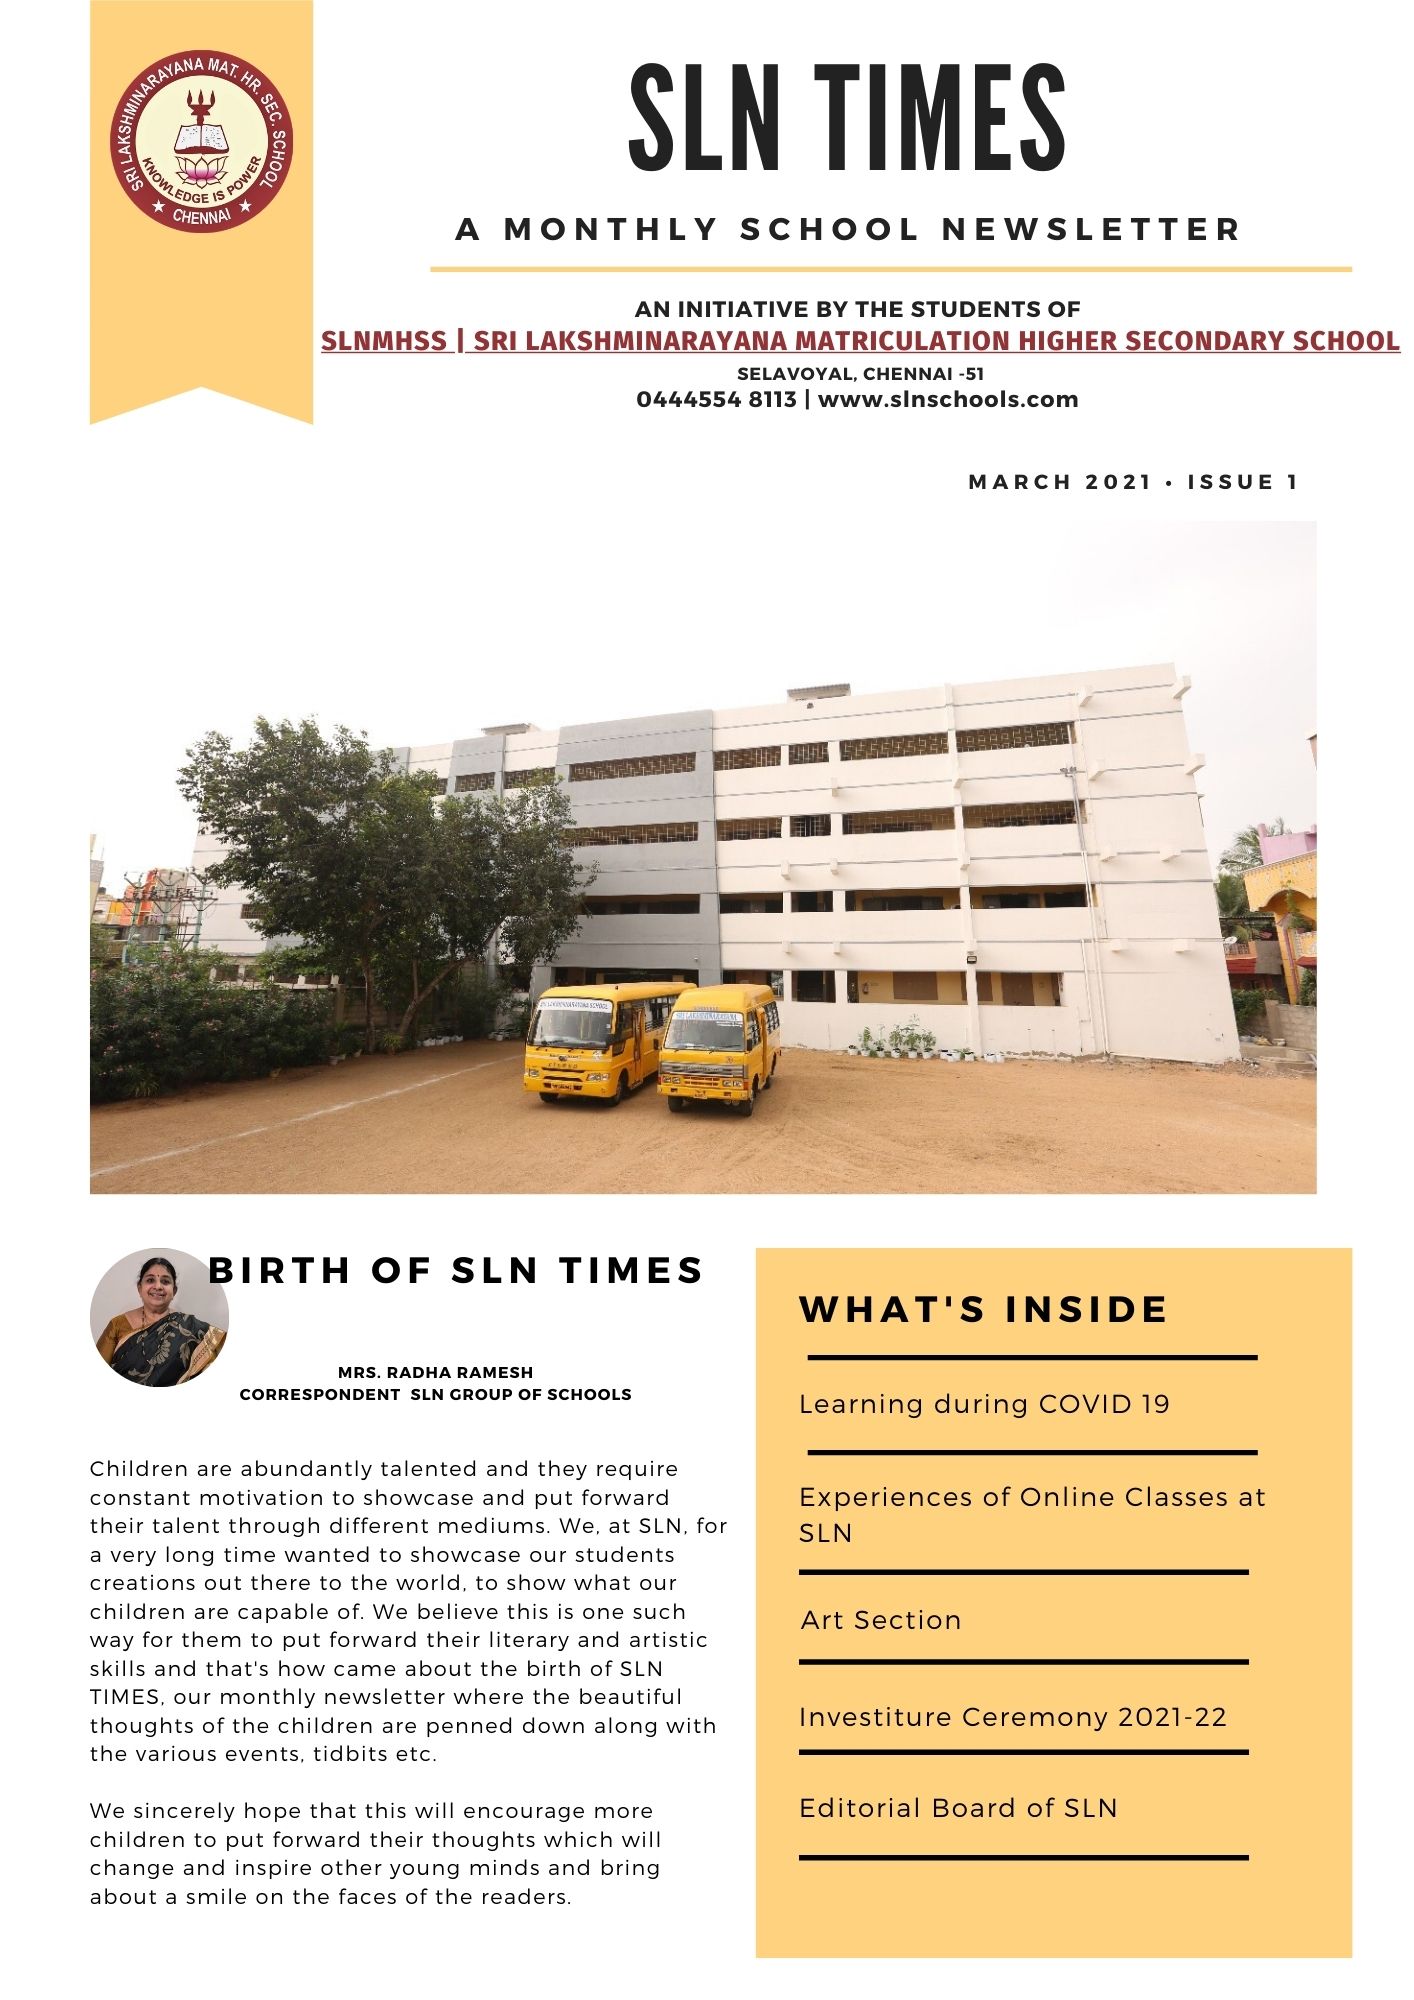 SLN TIMES ISSUE 1 - MARCH 2021